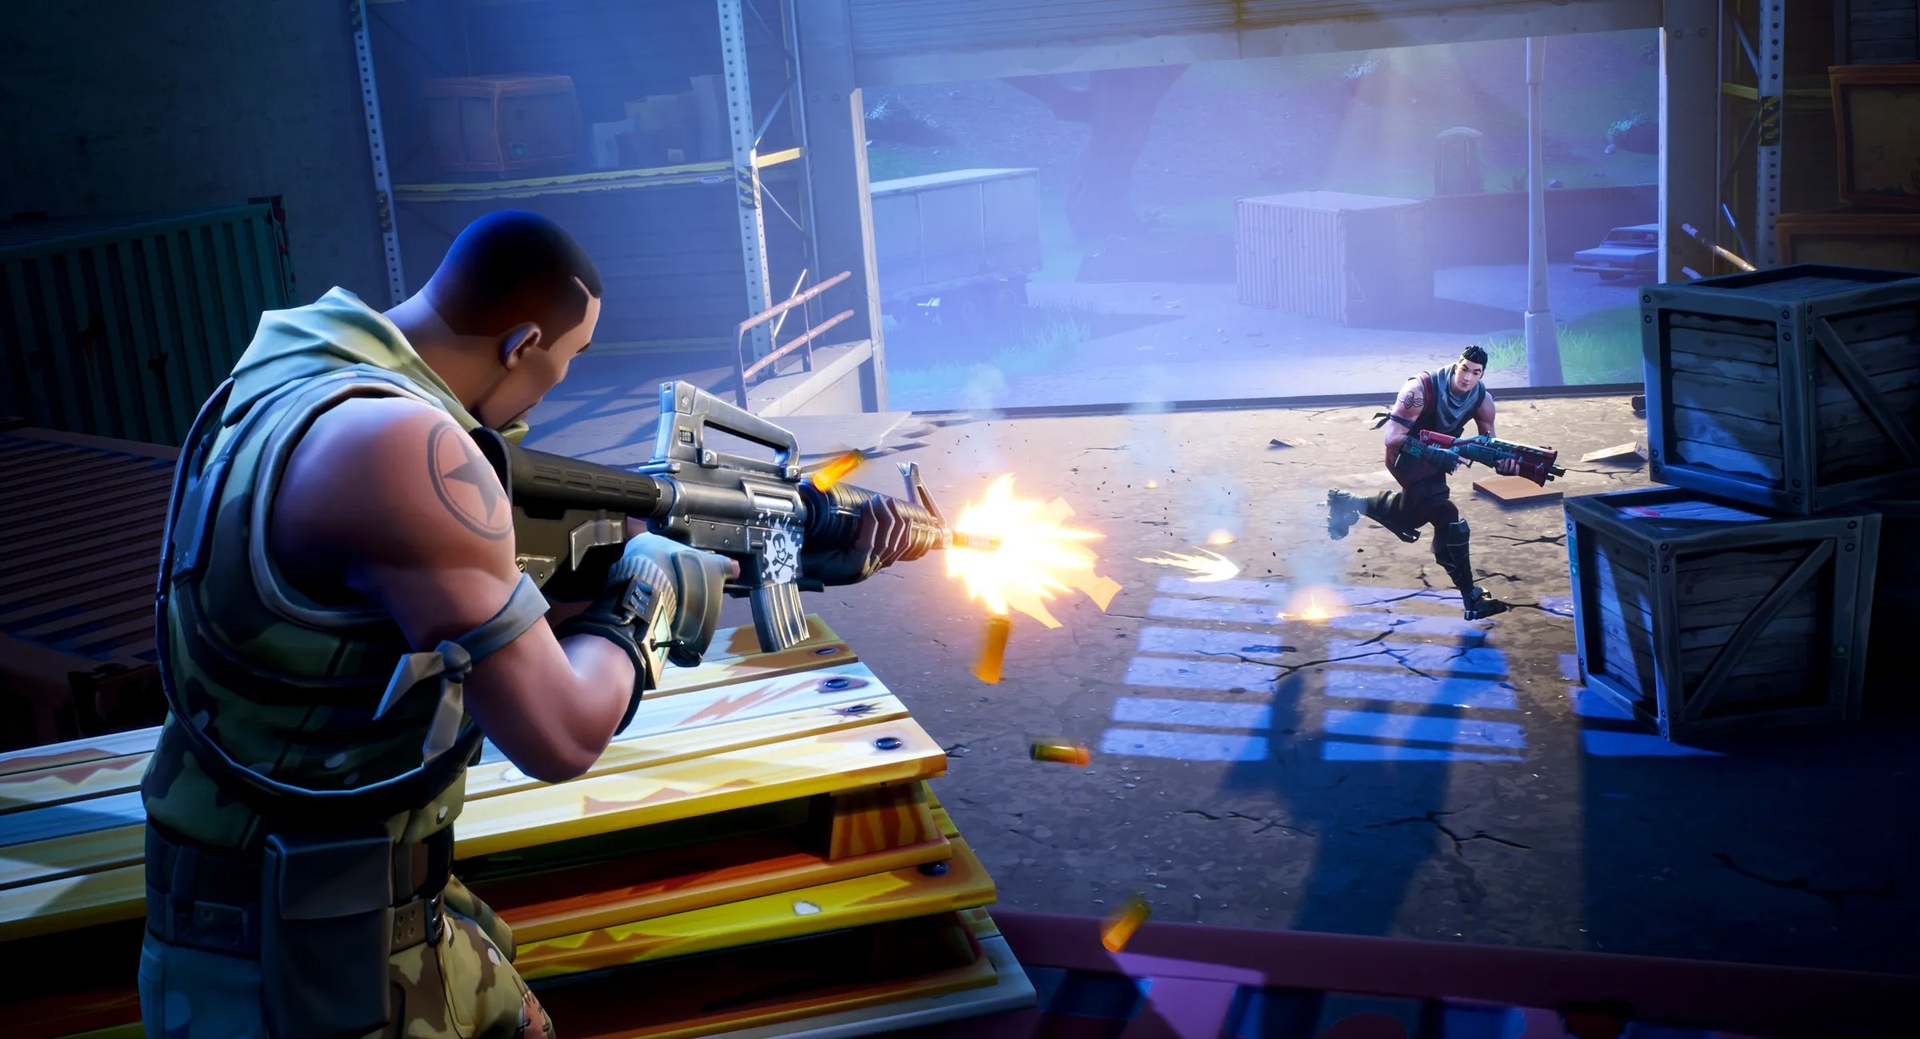 In this article, we are going to go over where to find Light Machine Gun Fortnite, so you can play with this unvaulted weapon and obliterate your opponents.